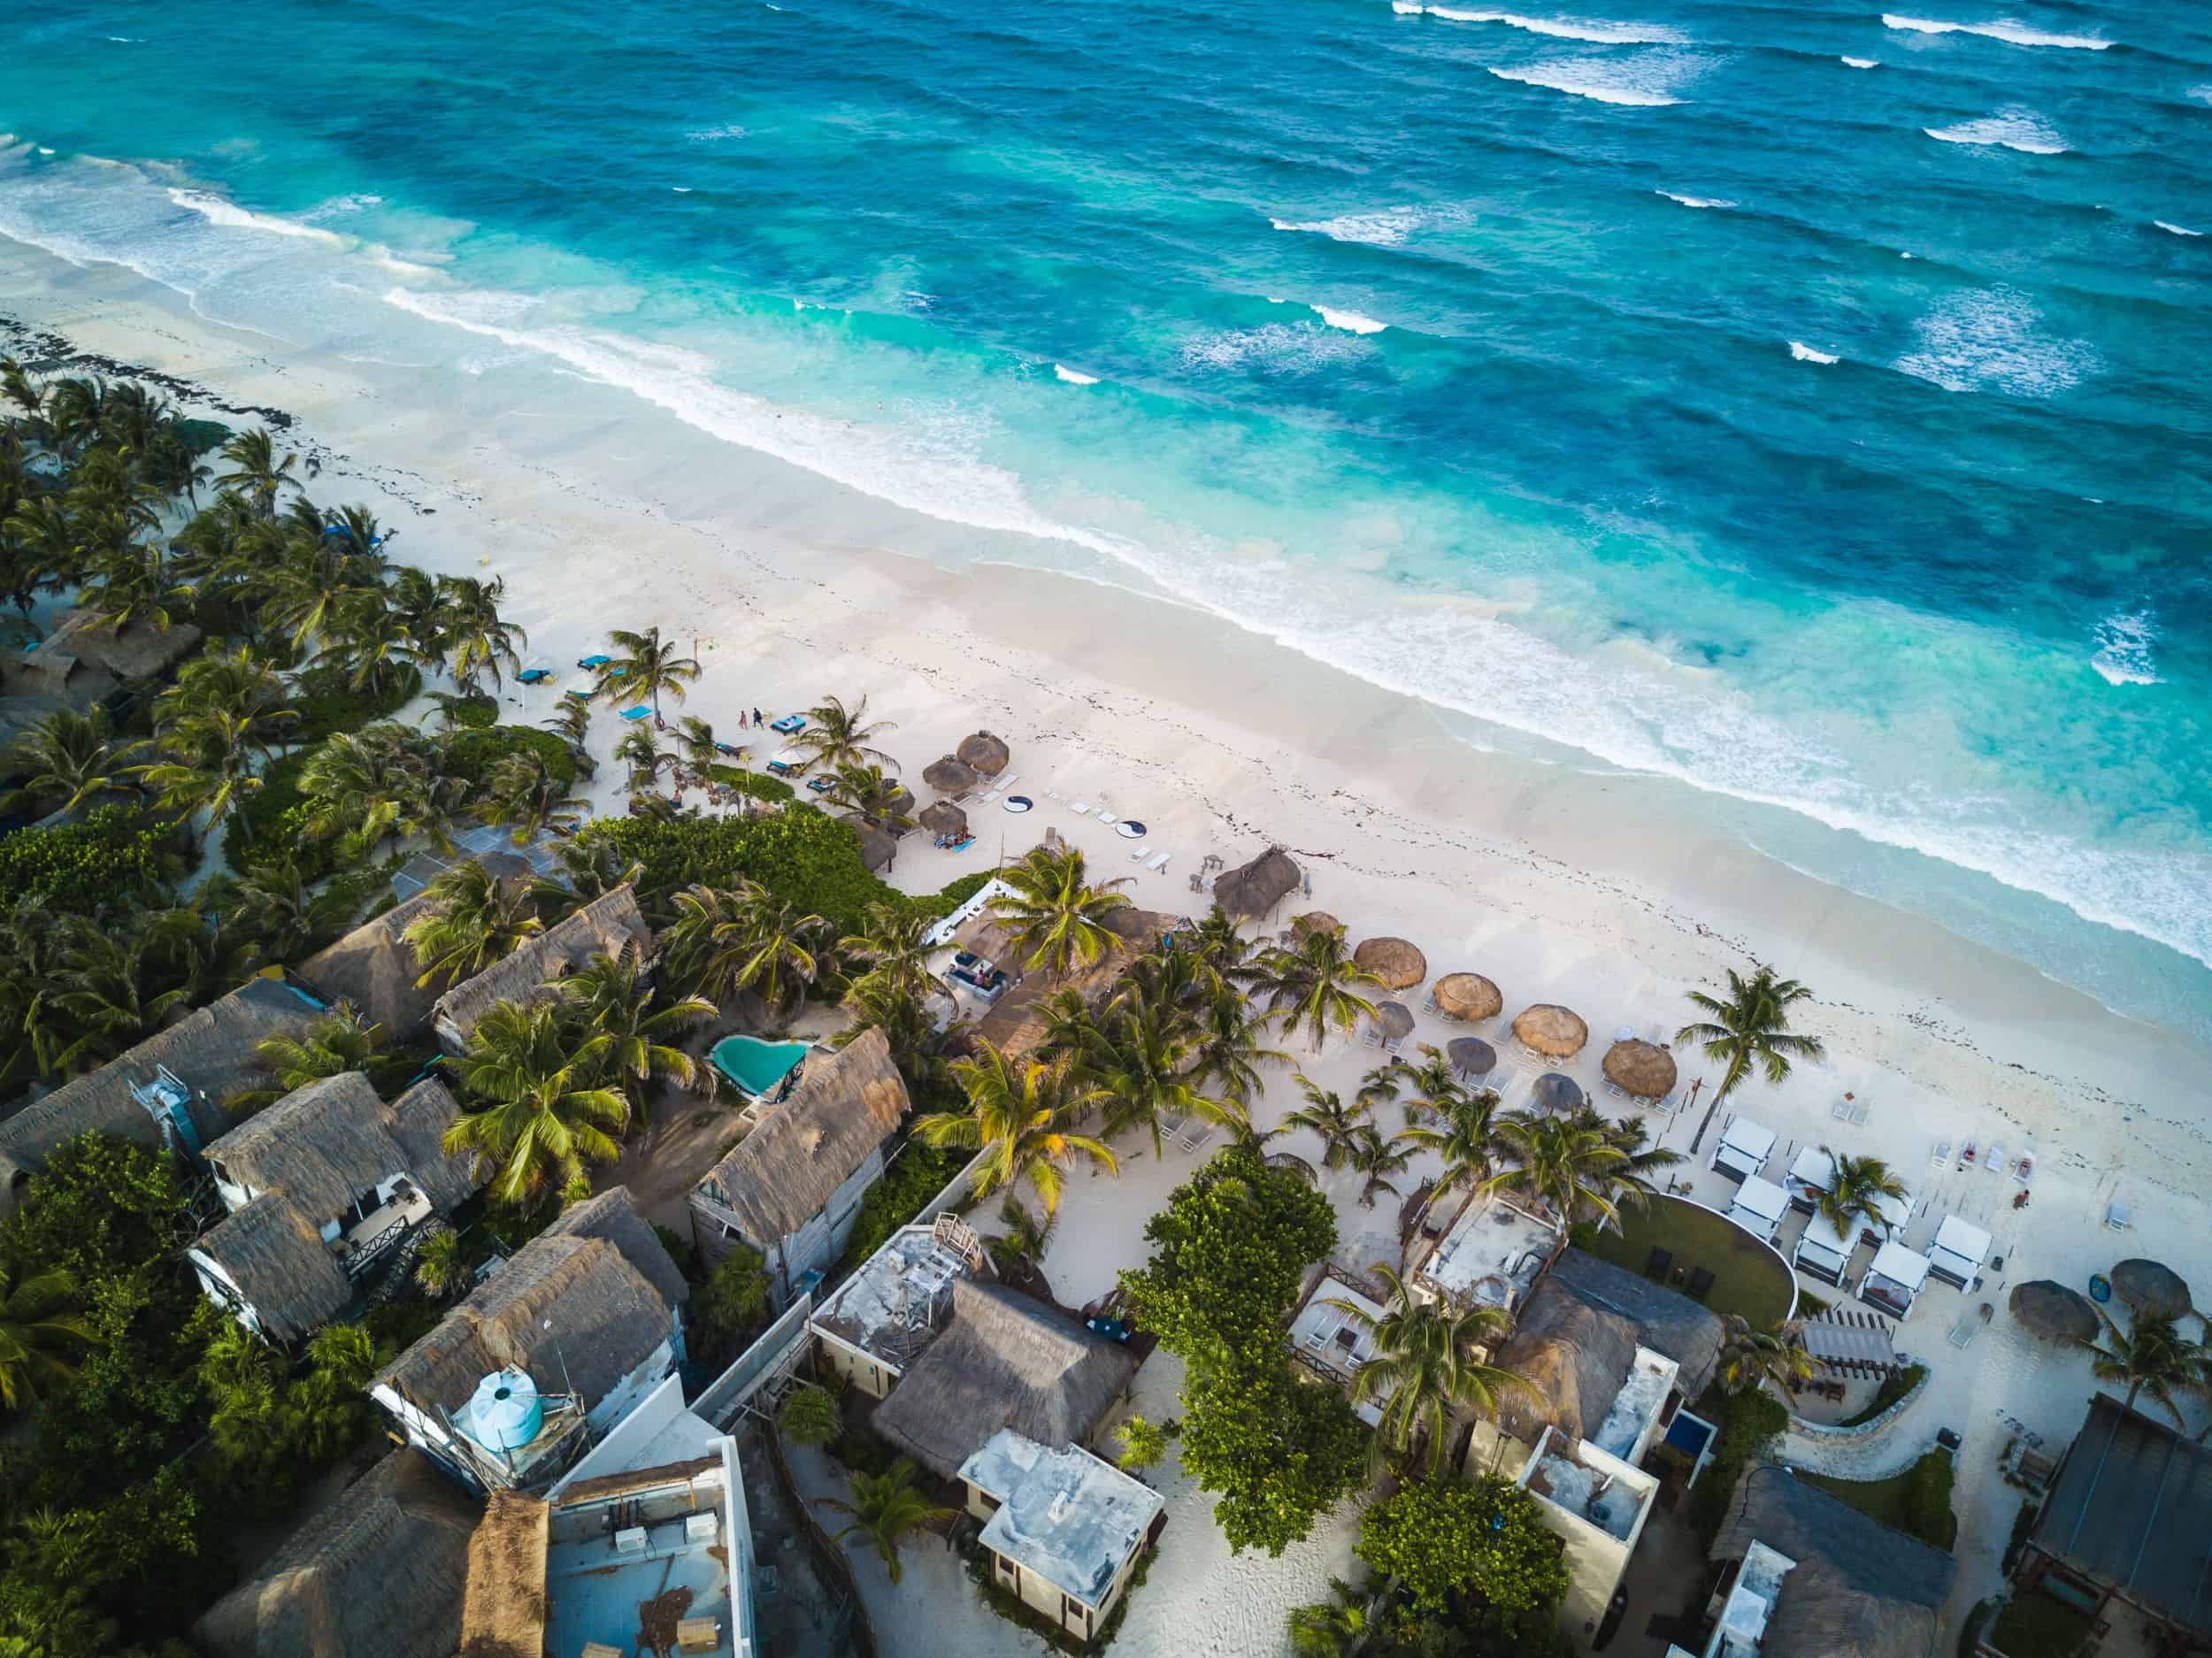 Akumal vs Tulum - Which is the Better Vacation?